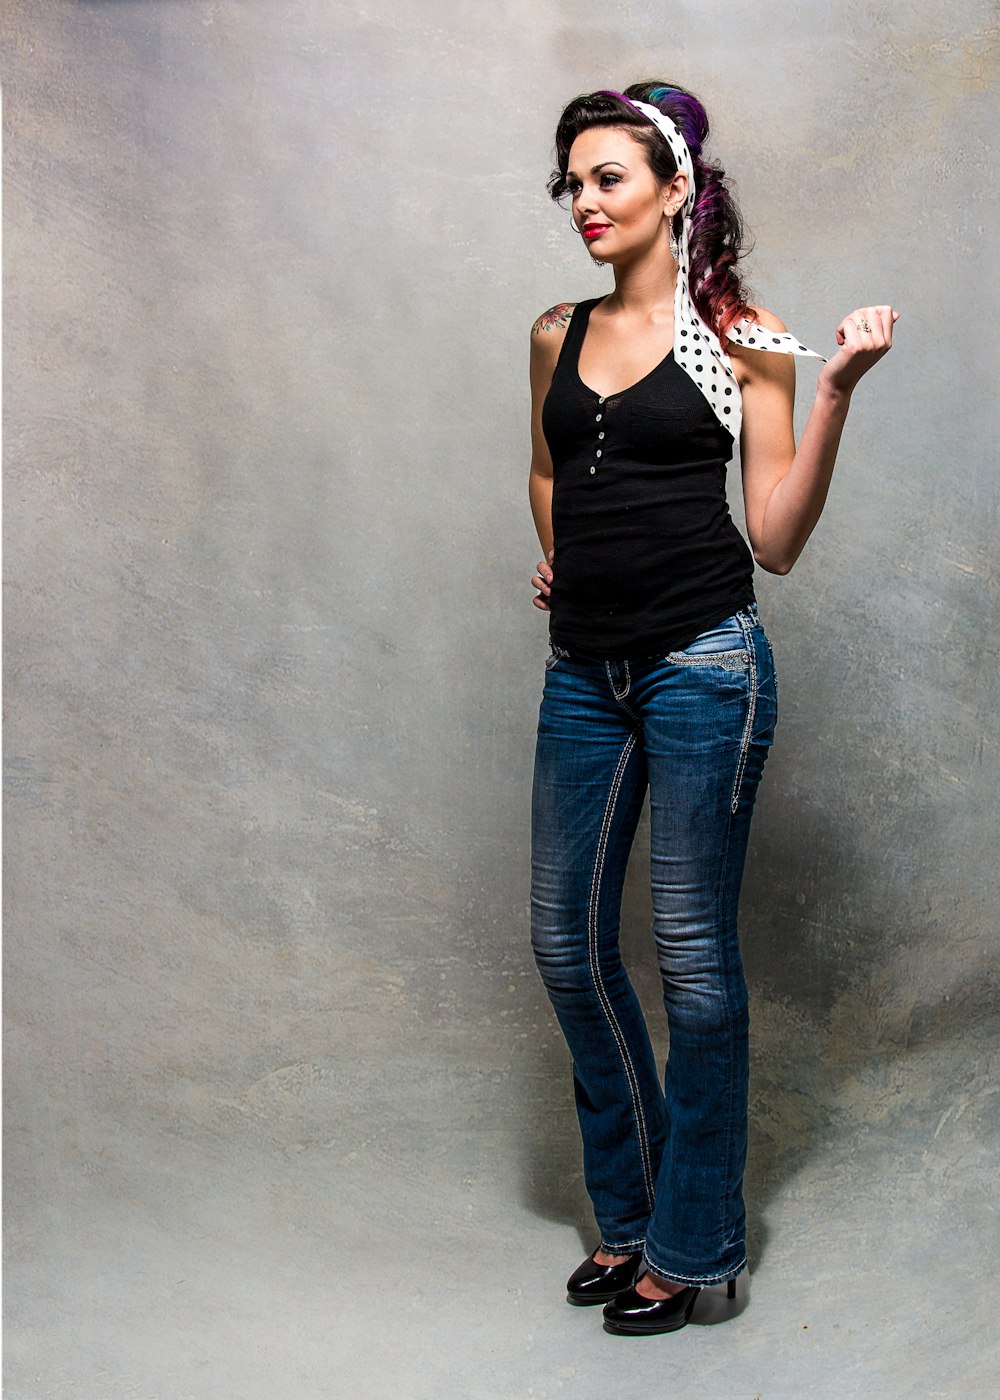 woman in black tank top and blue denim jeans